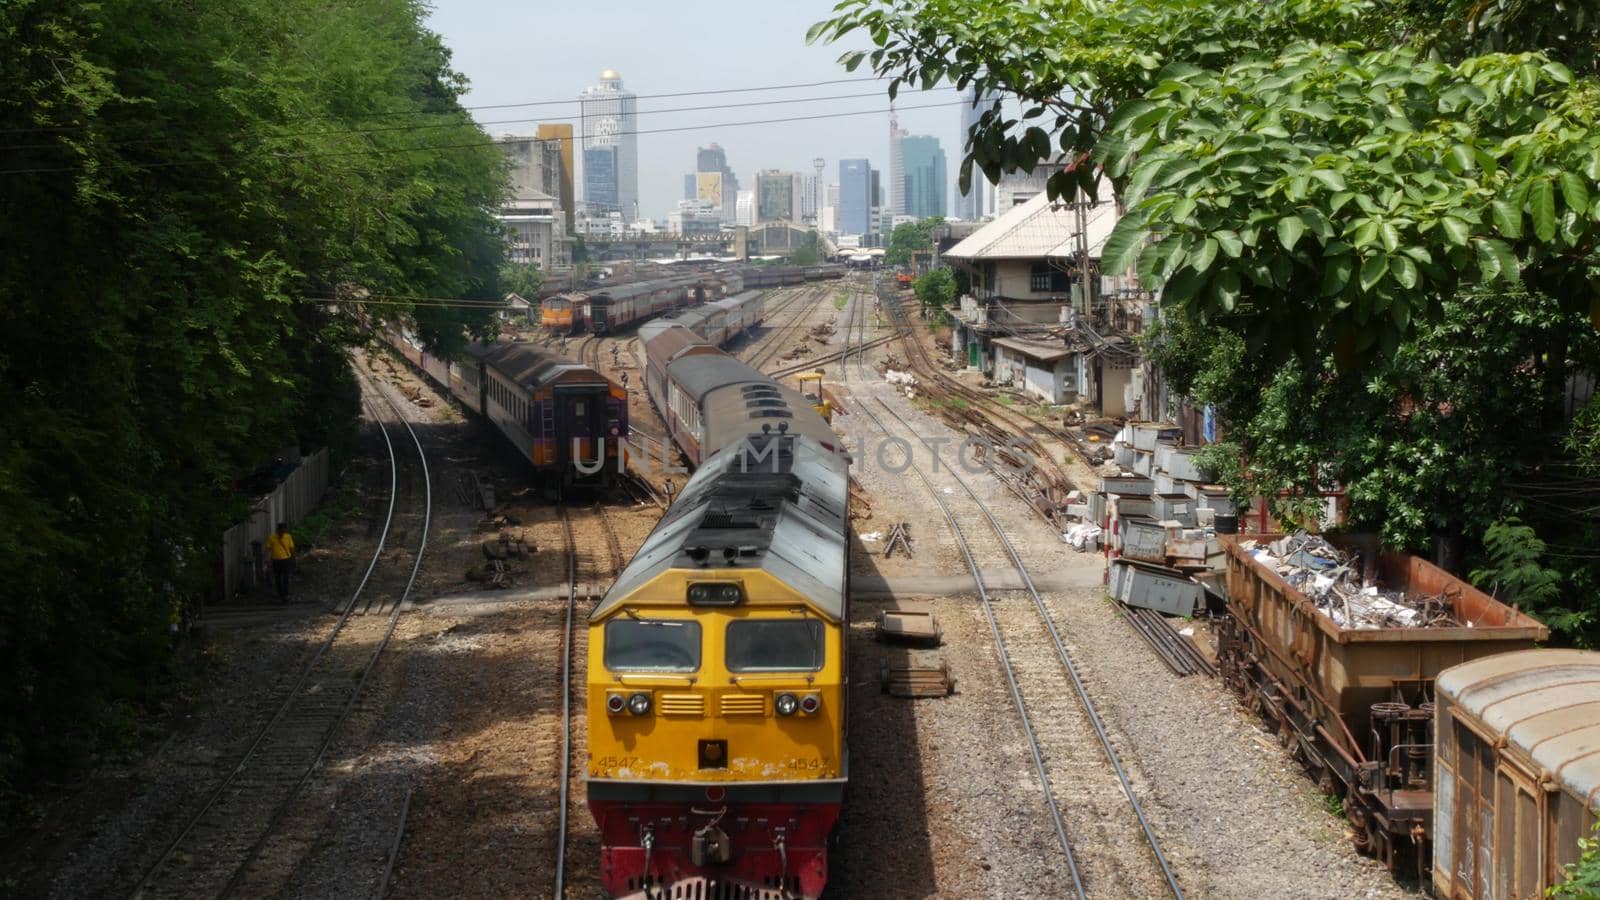 BANGKOK, THAILAND - 11 JULY, 2019: View of the train station against the backdrop of the cityscape and skyscrapers. Hua Lamphong is the hub of public transportation. State railway transport in Siam